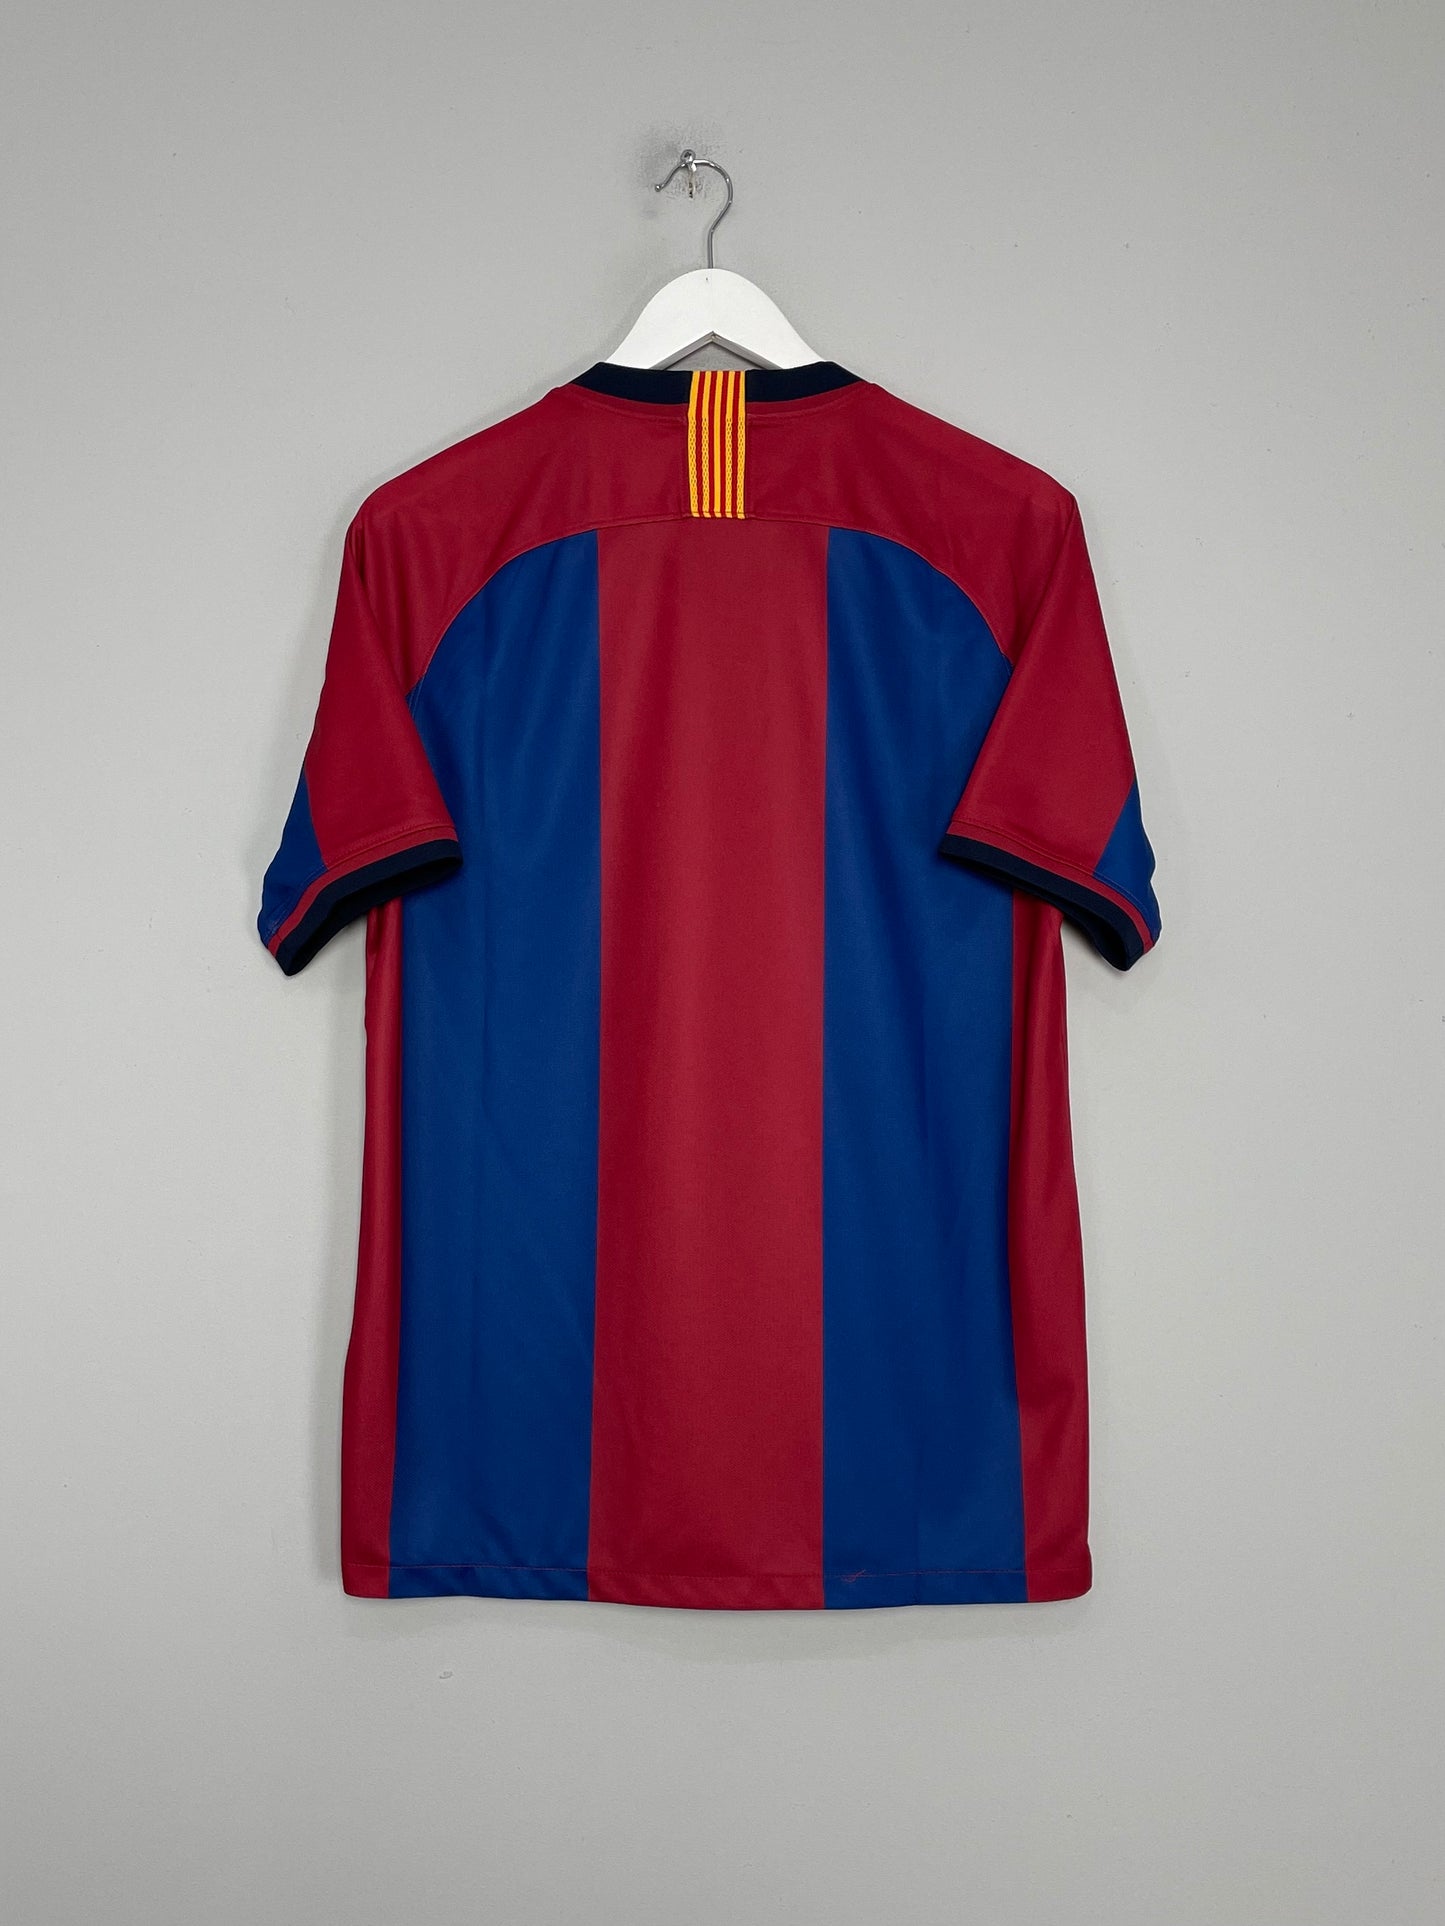 1998/99 BARCELONA *RE-ISSUE* HOME SHIRT (M) NIKE